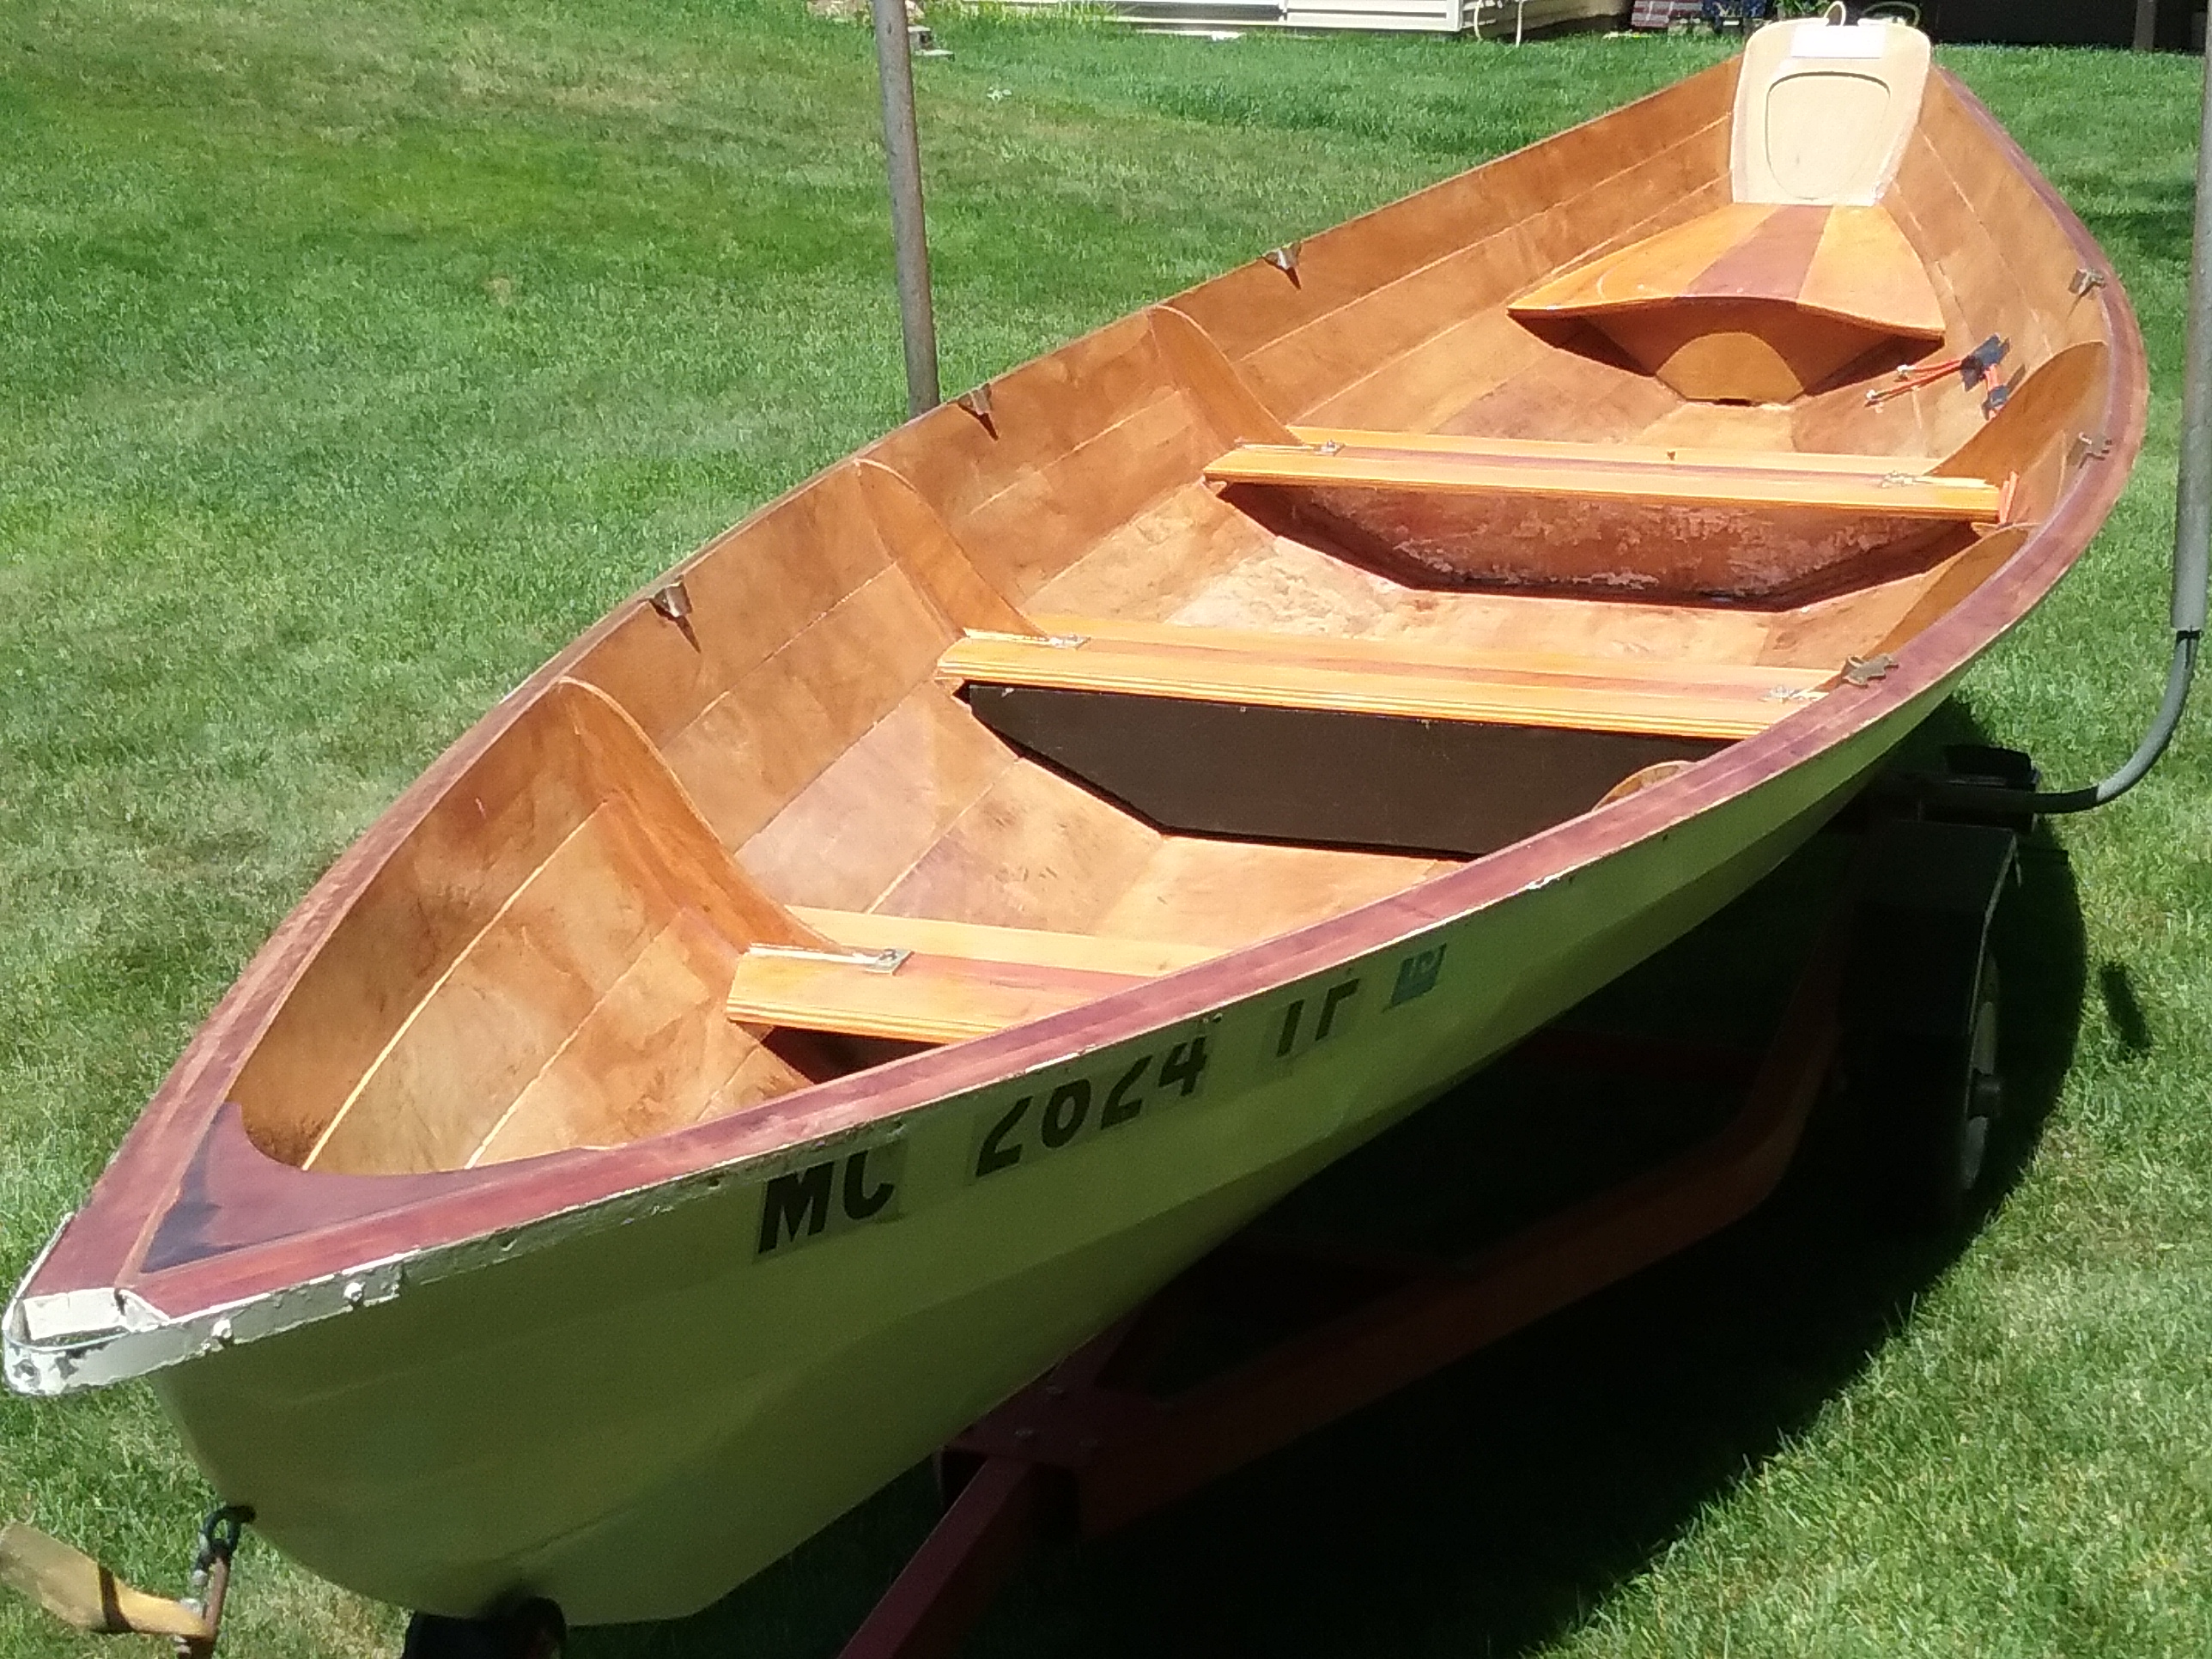 2009 17 foot Chesapeake northeaster dory Rowboat for sale in Grand Haven, MI - image 10 